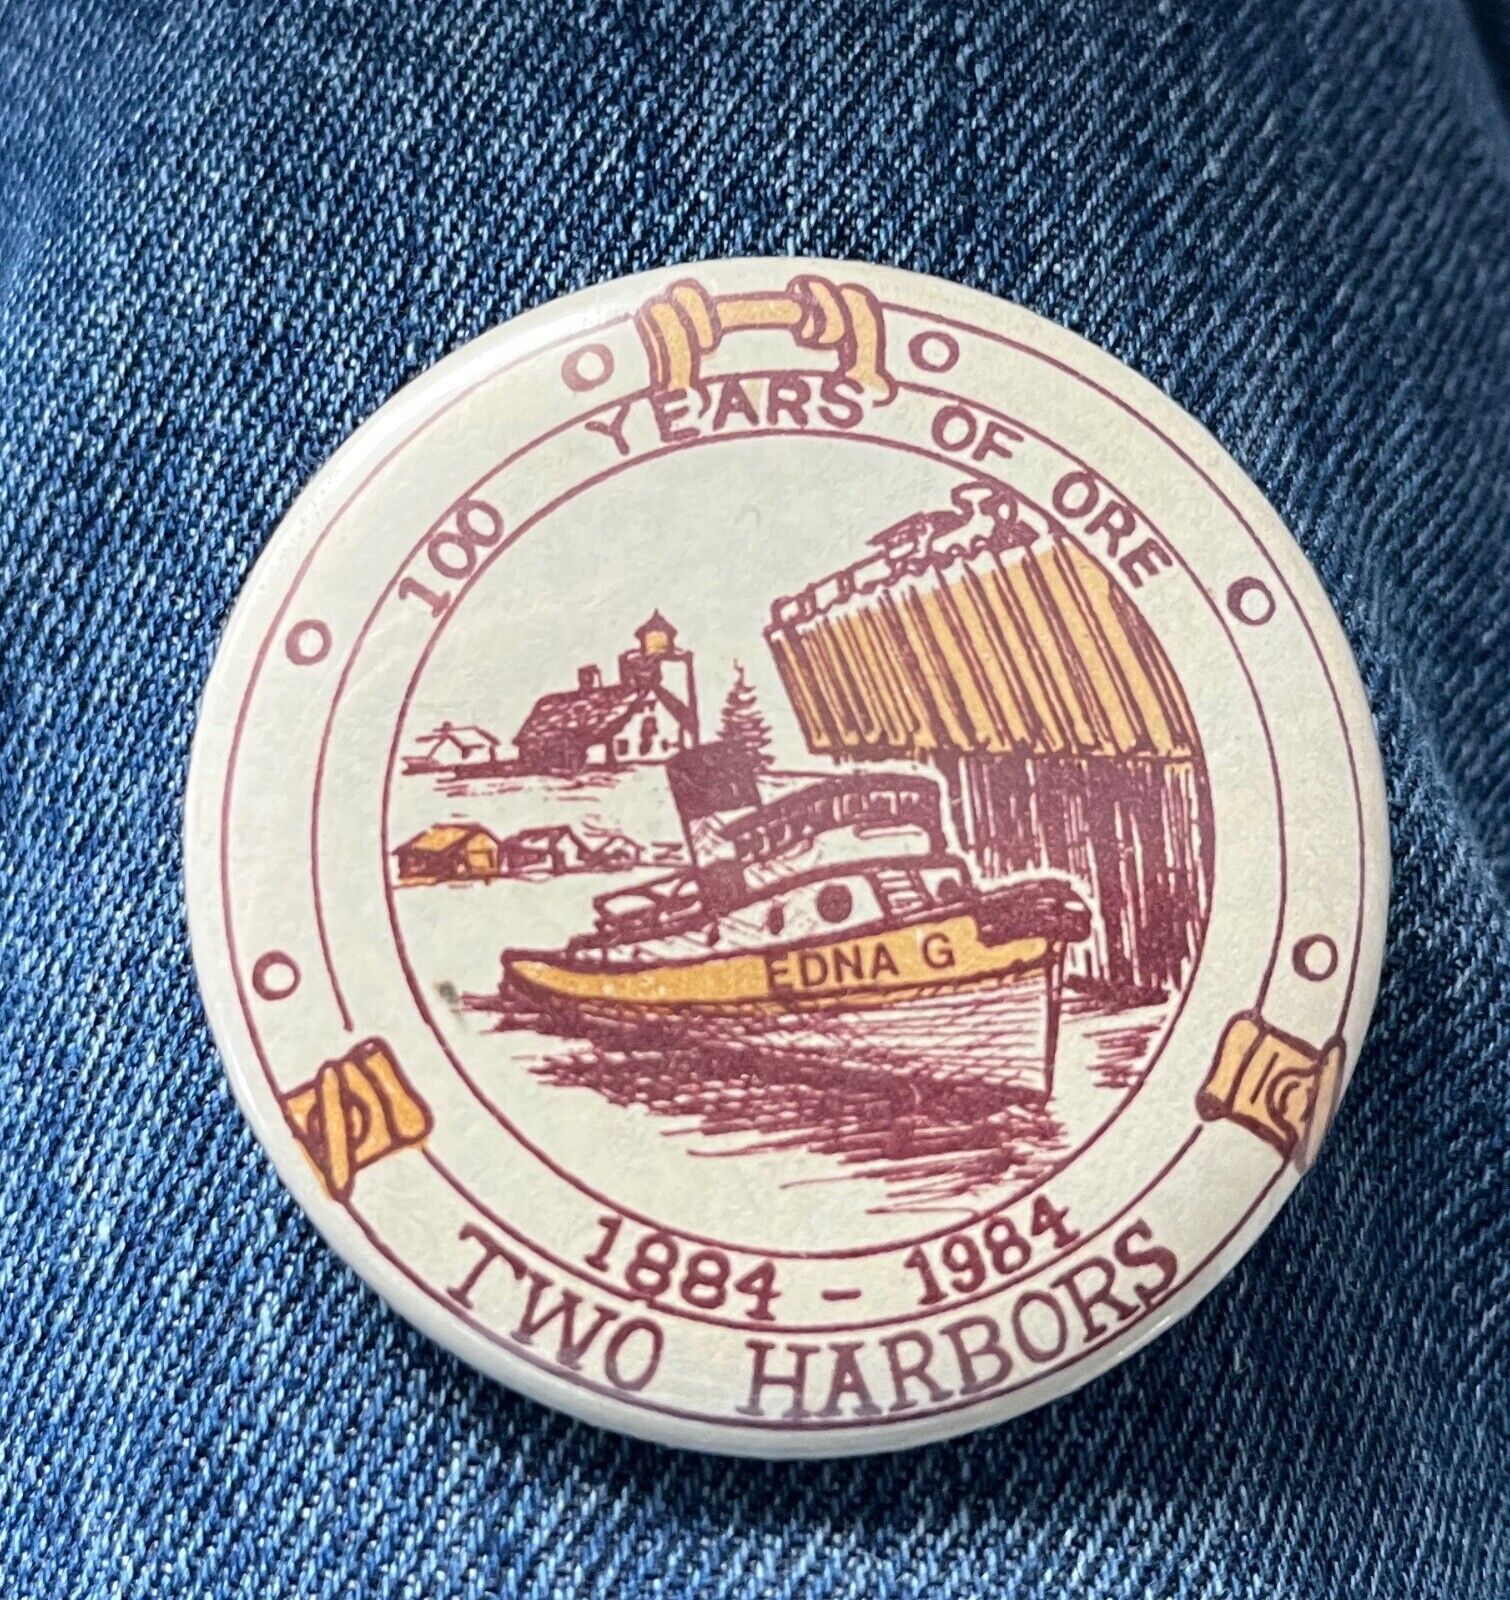 1884-1984 100 Years Of Ore Two Harbors, Mn.  2 1/4